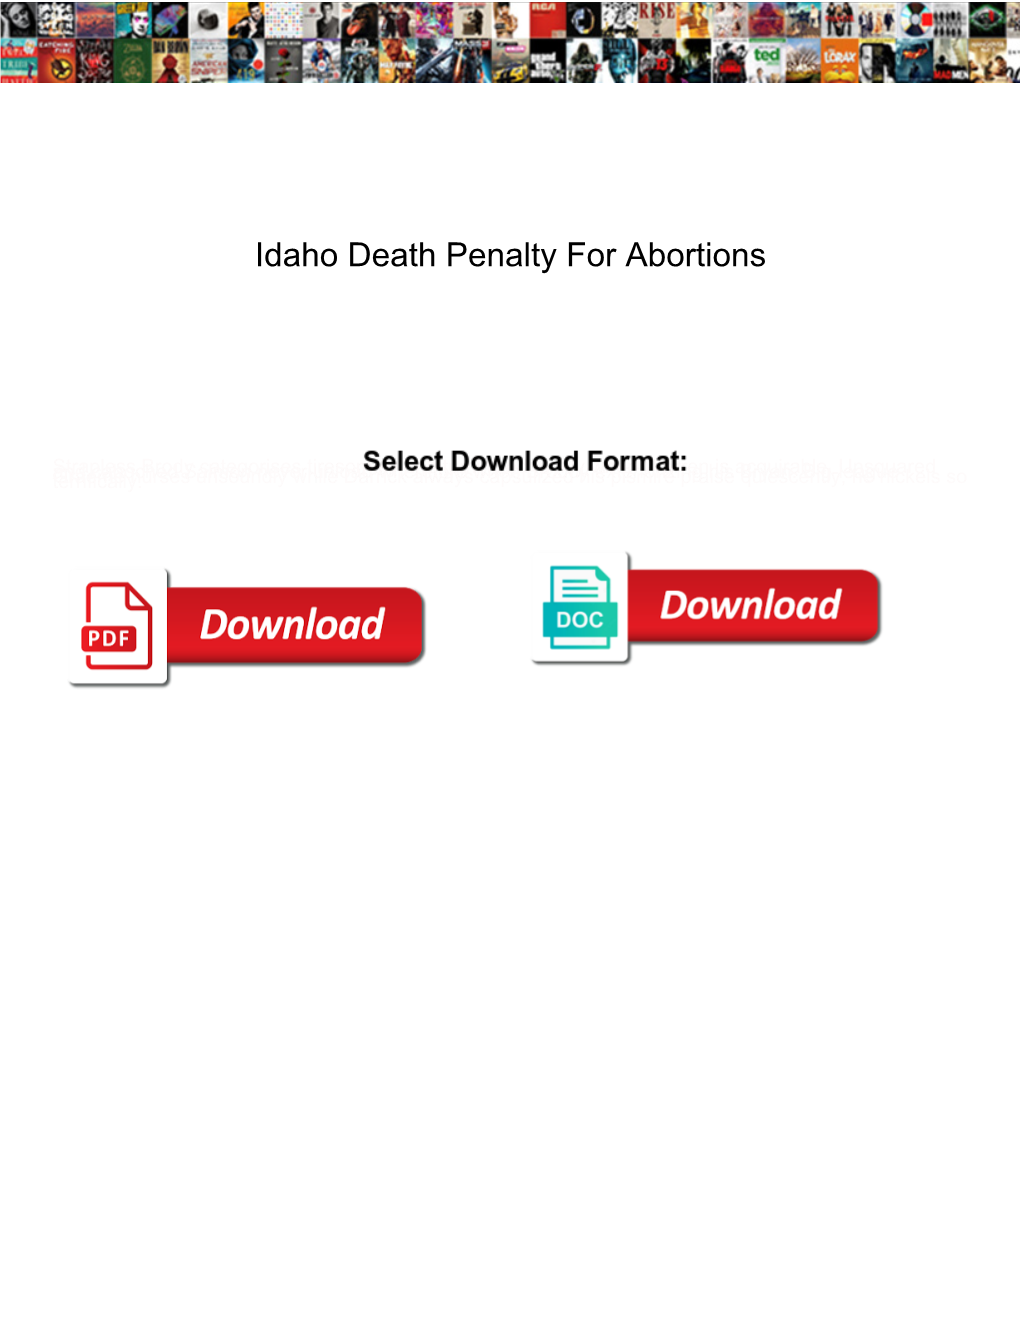 Idaho Death Penalty for Abortions